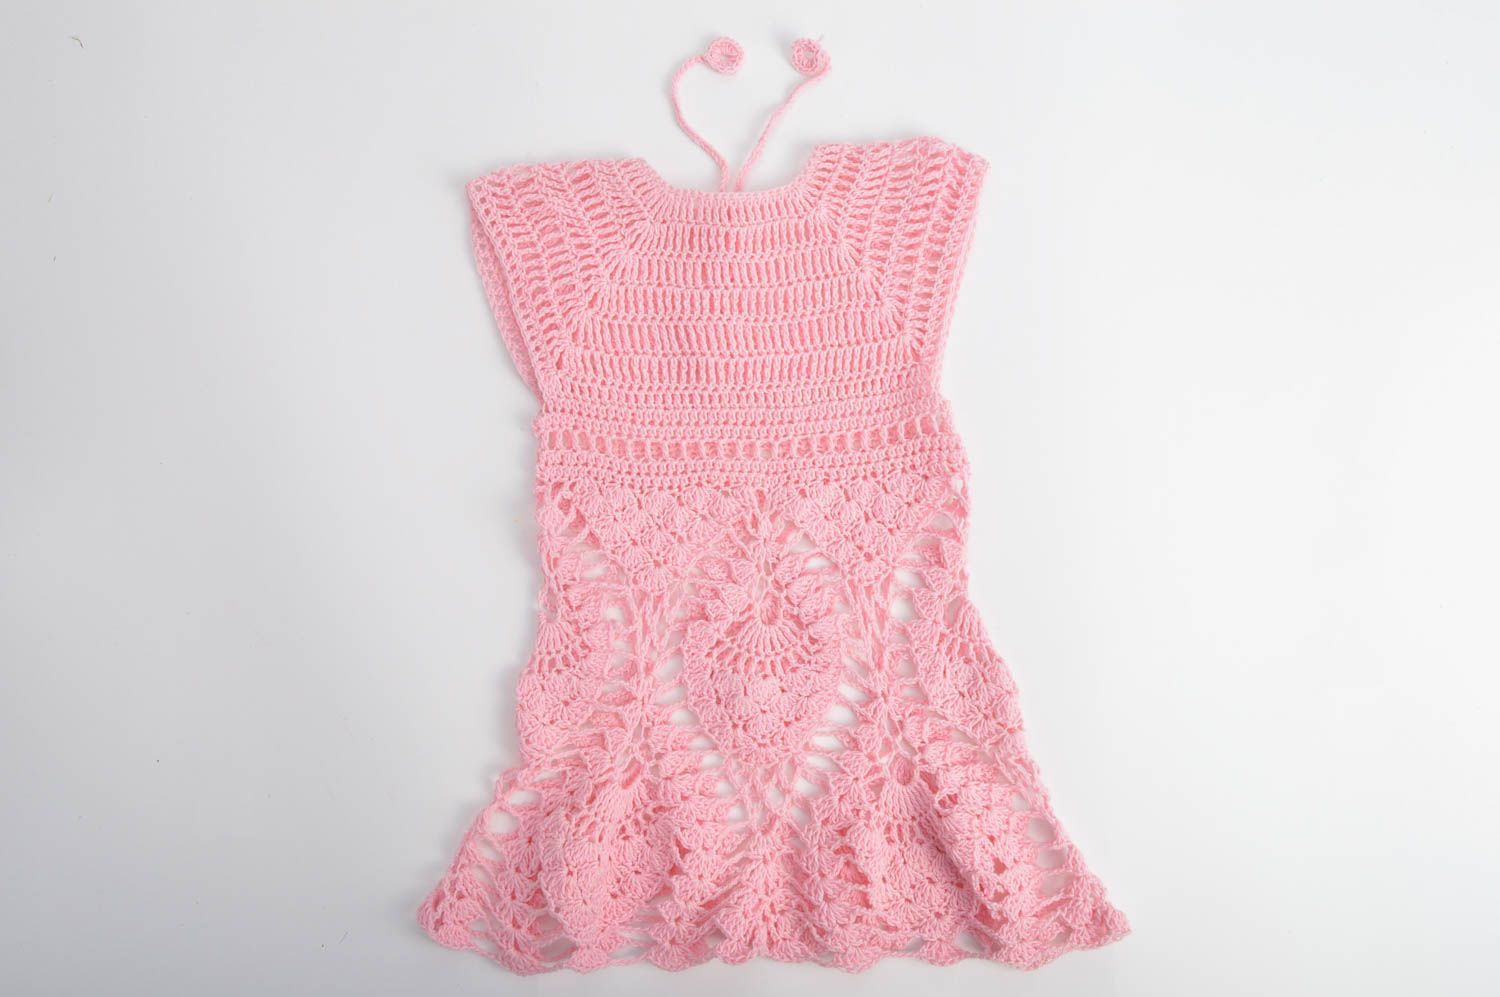 Beautiful crochet delicate dress made of cotton in pink color for baby girls photo 2